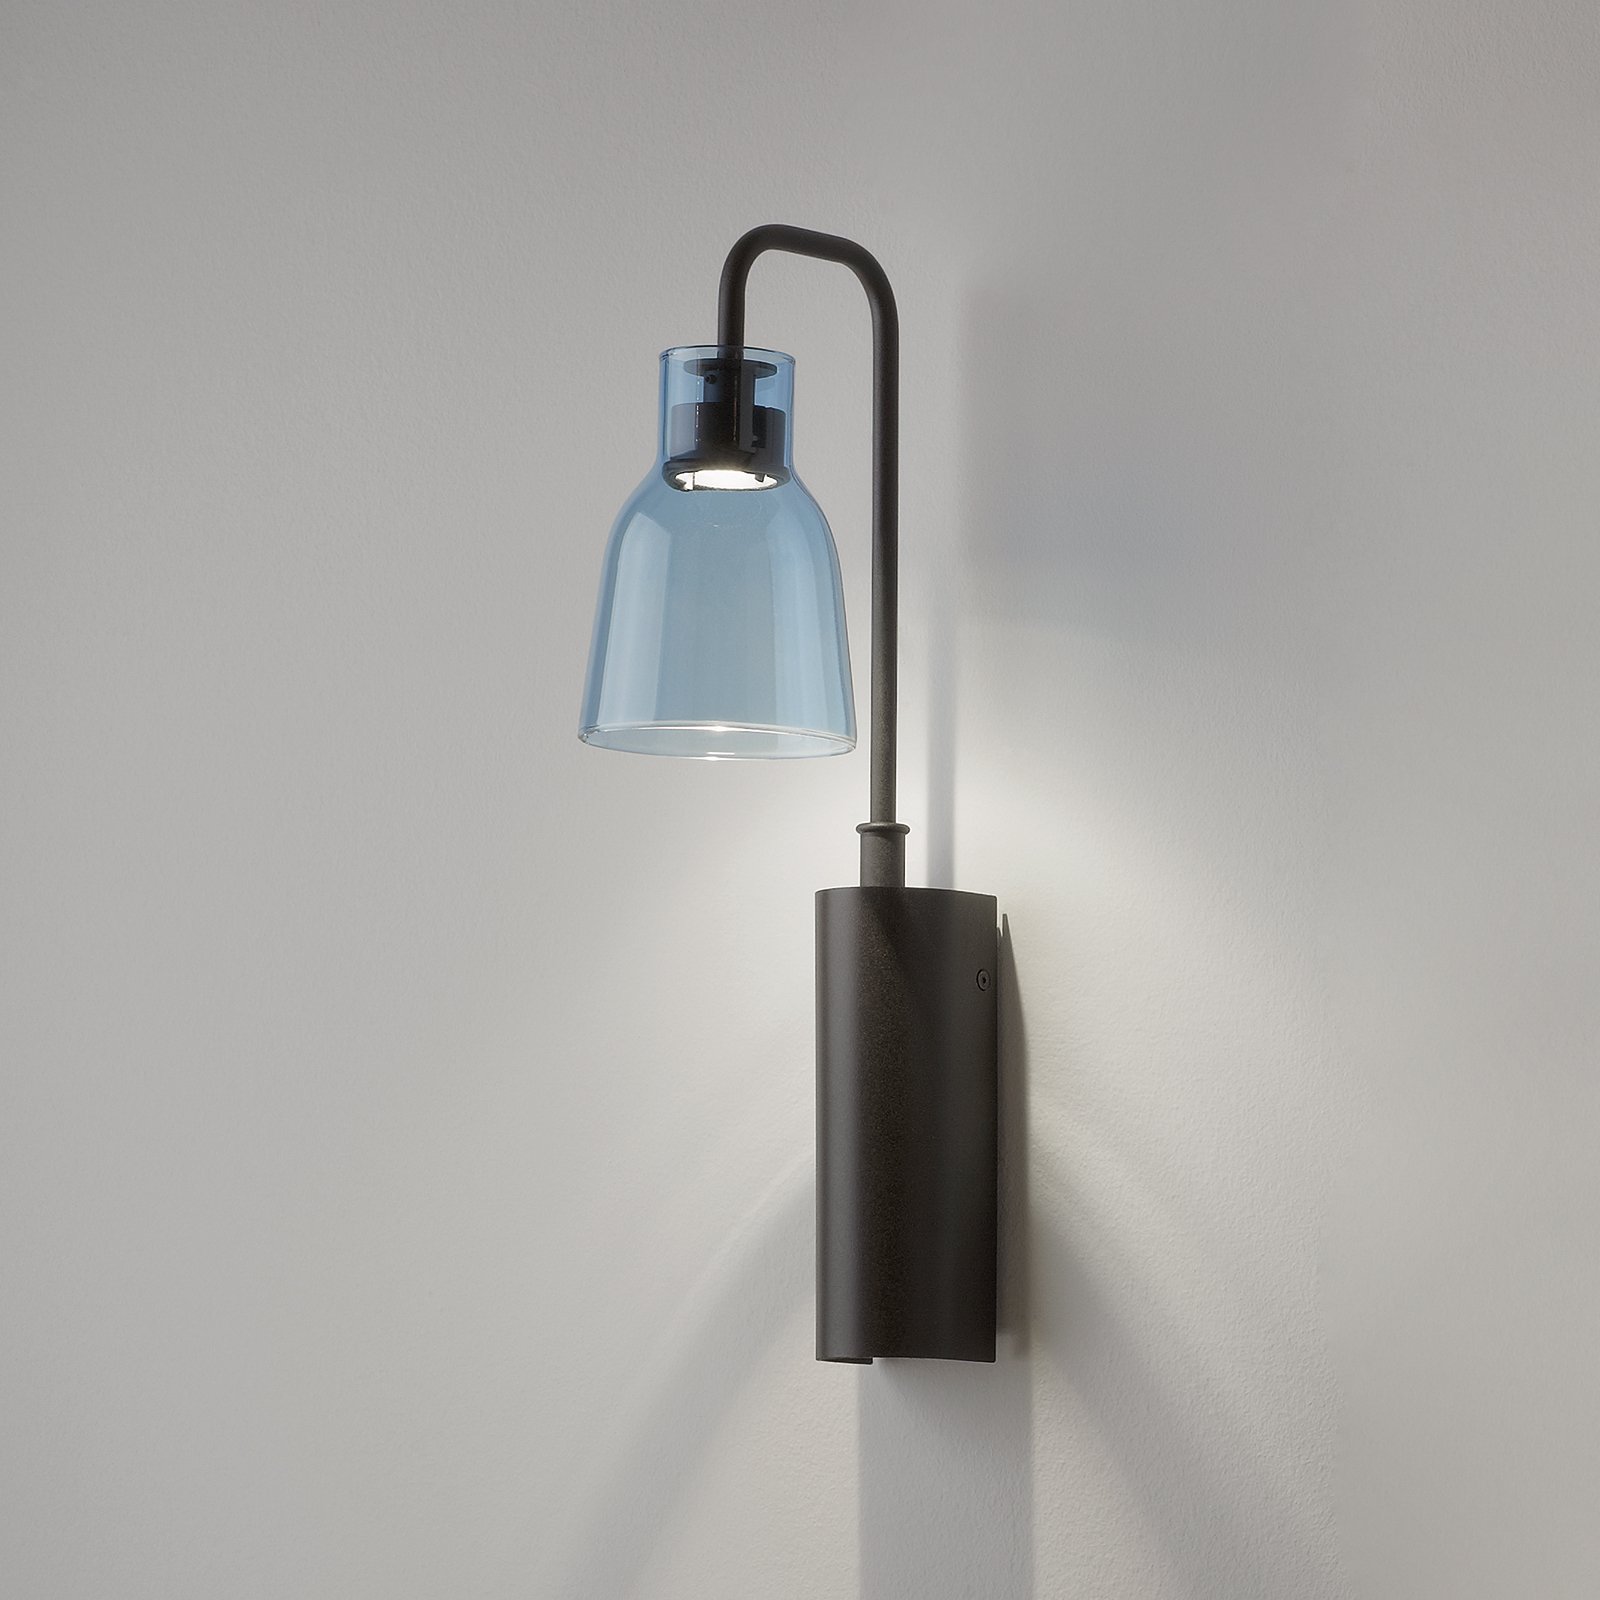 Bover Drip A/02 LED wall light, blue